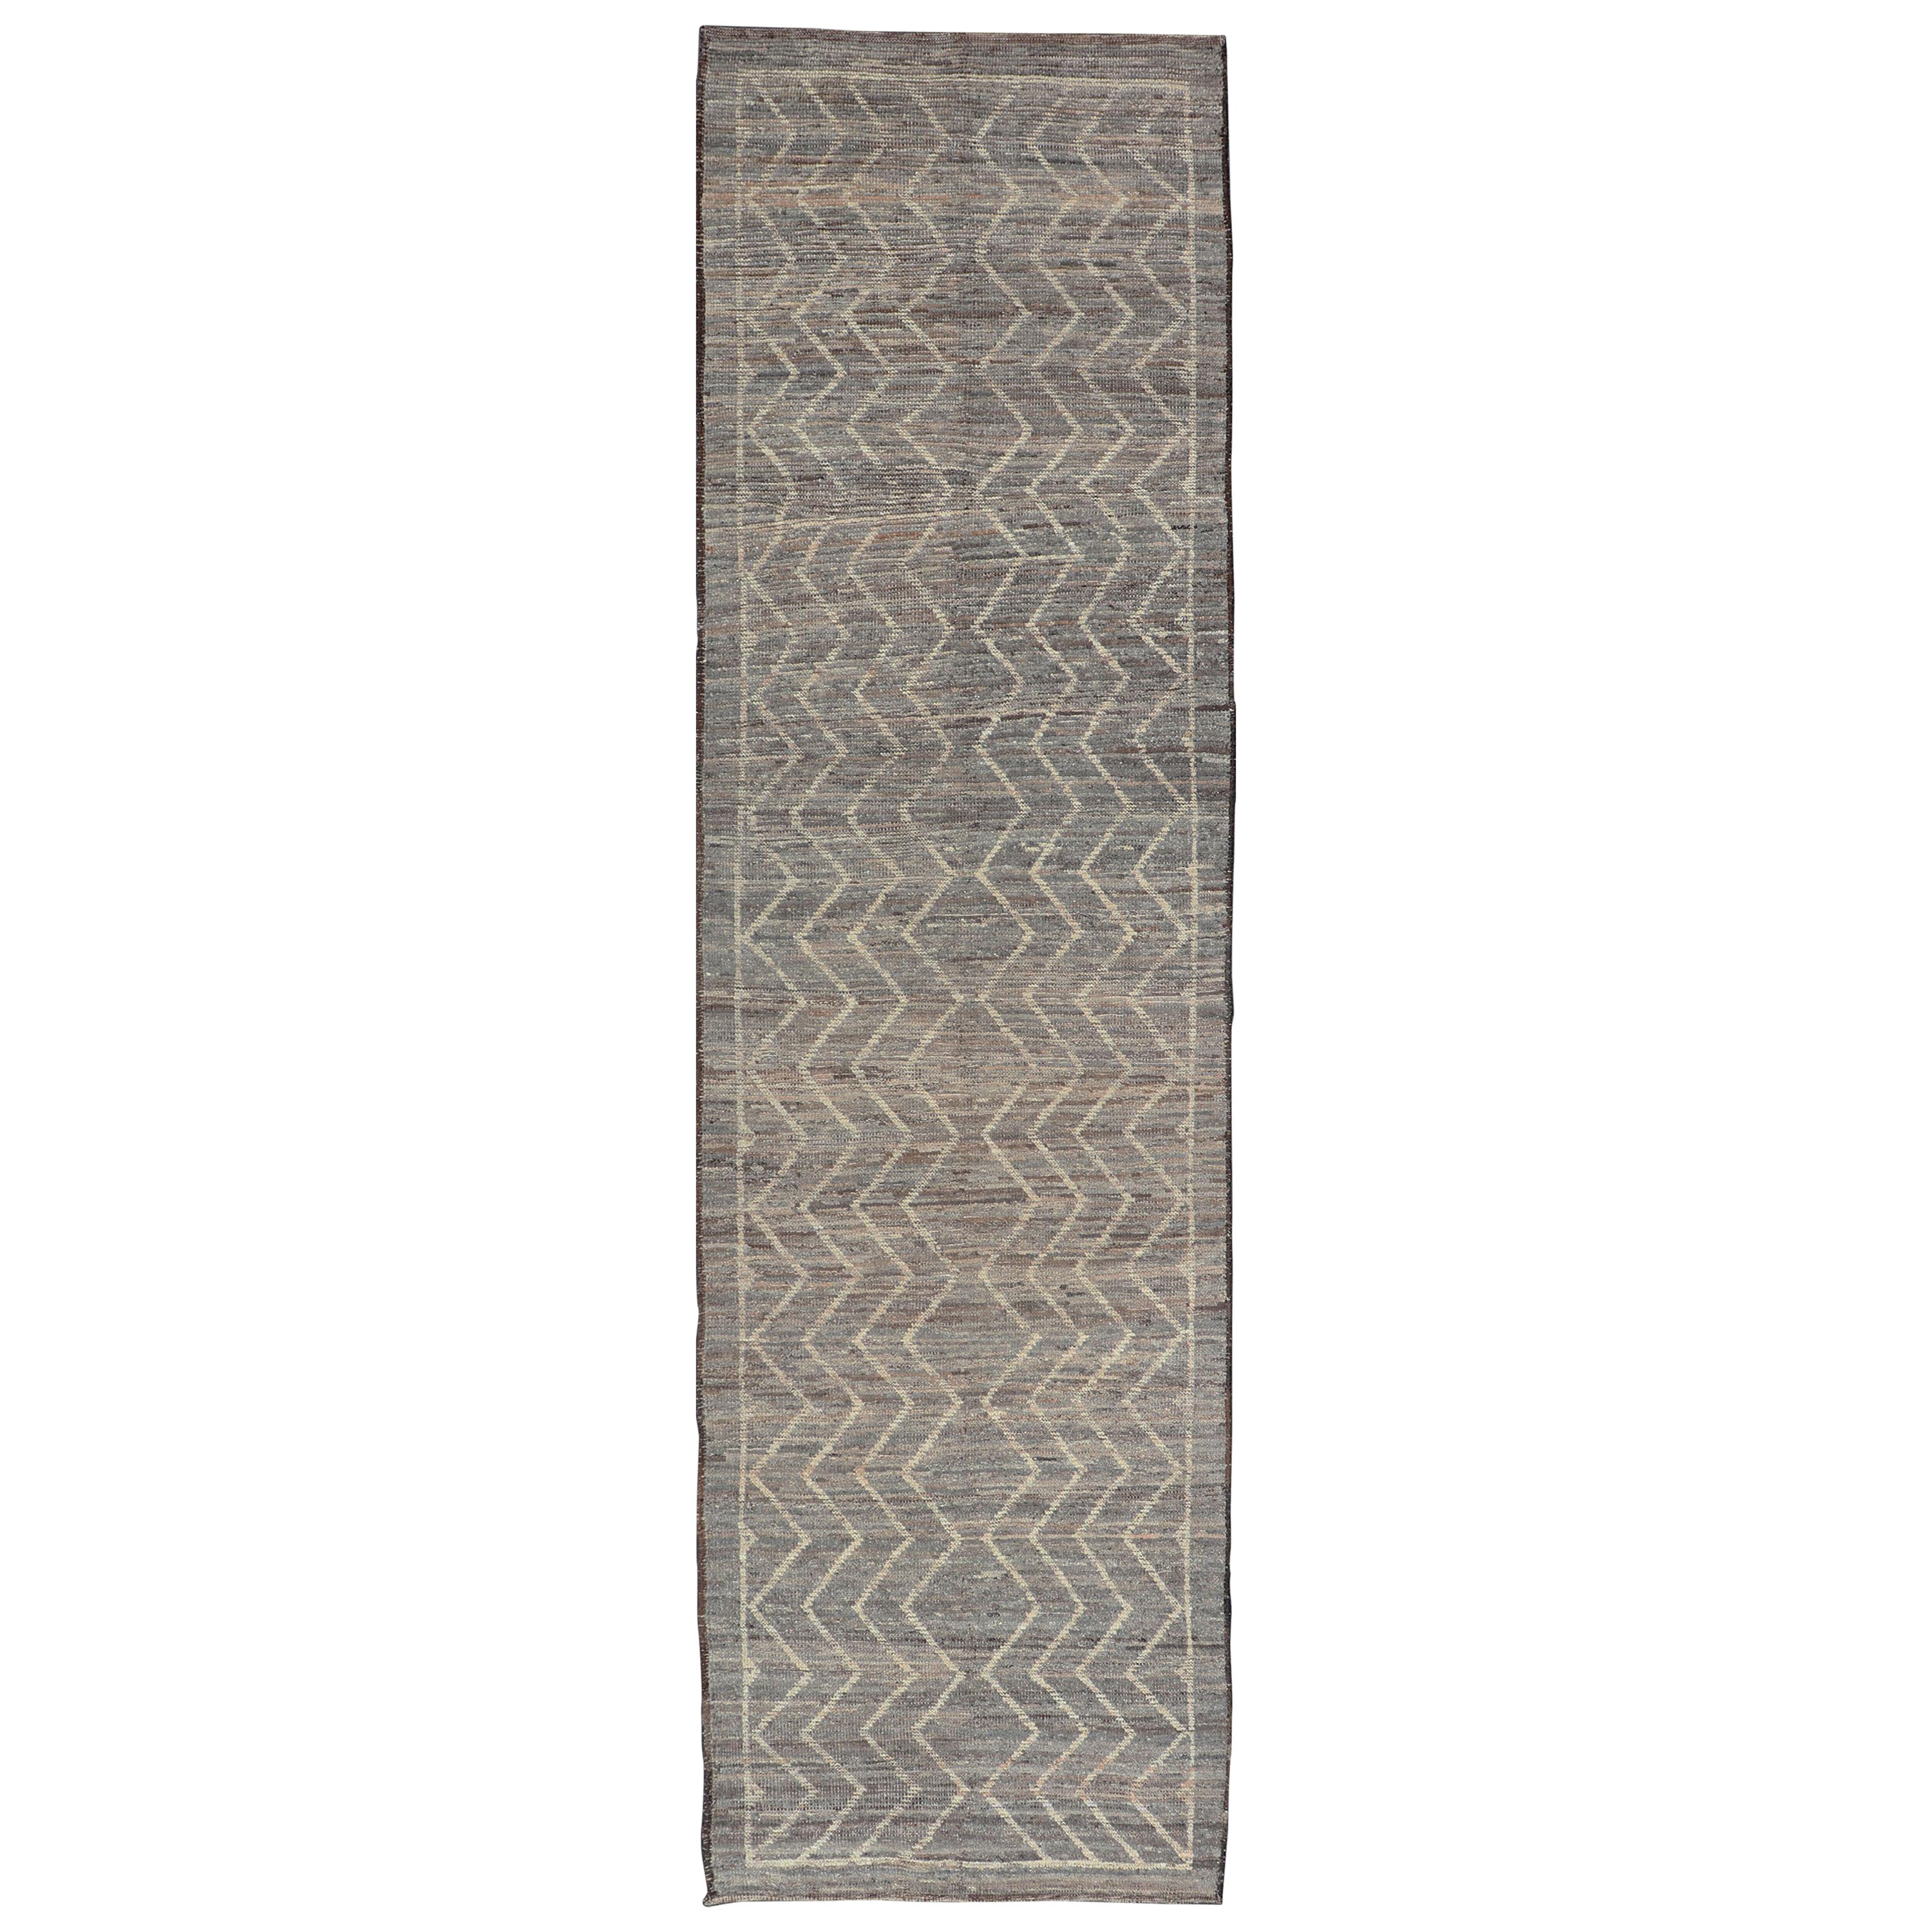 Modern Rug with Tribal Design in Light Gray, Taupe, Cream, and Natural Colors